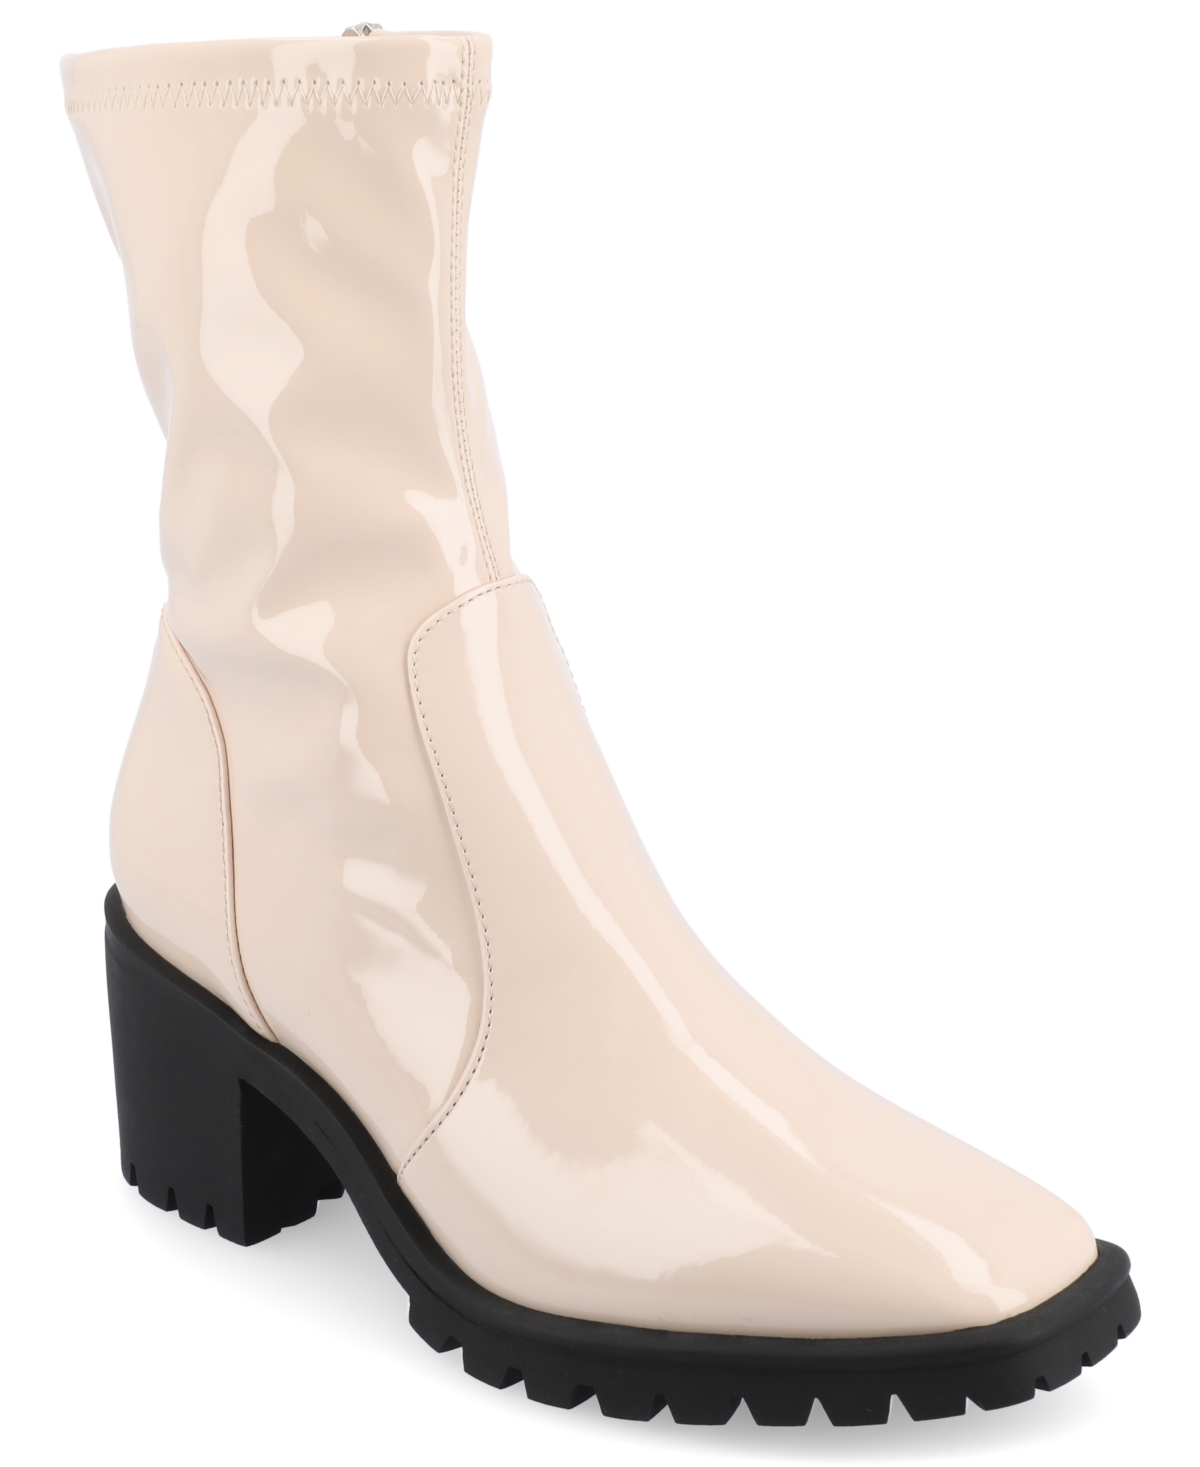 Shop Journee Collection Women's Icelyn Flexible Patent Faux Leather Lug Sole Boots In Bone